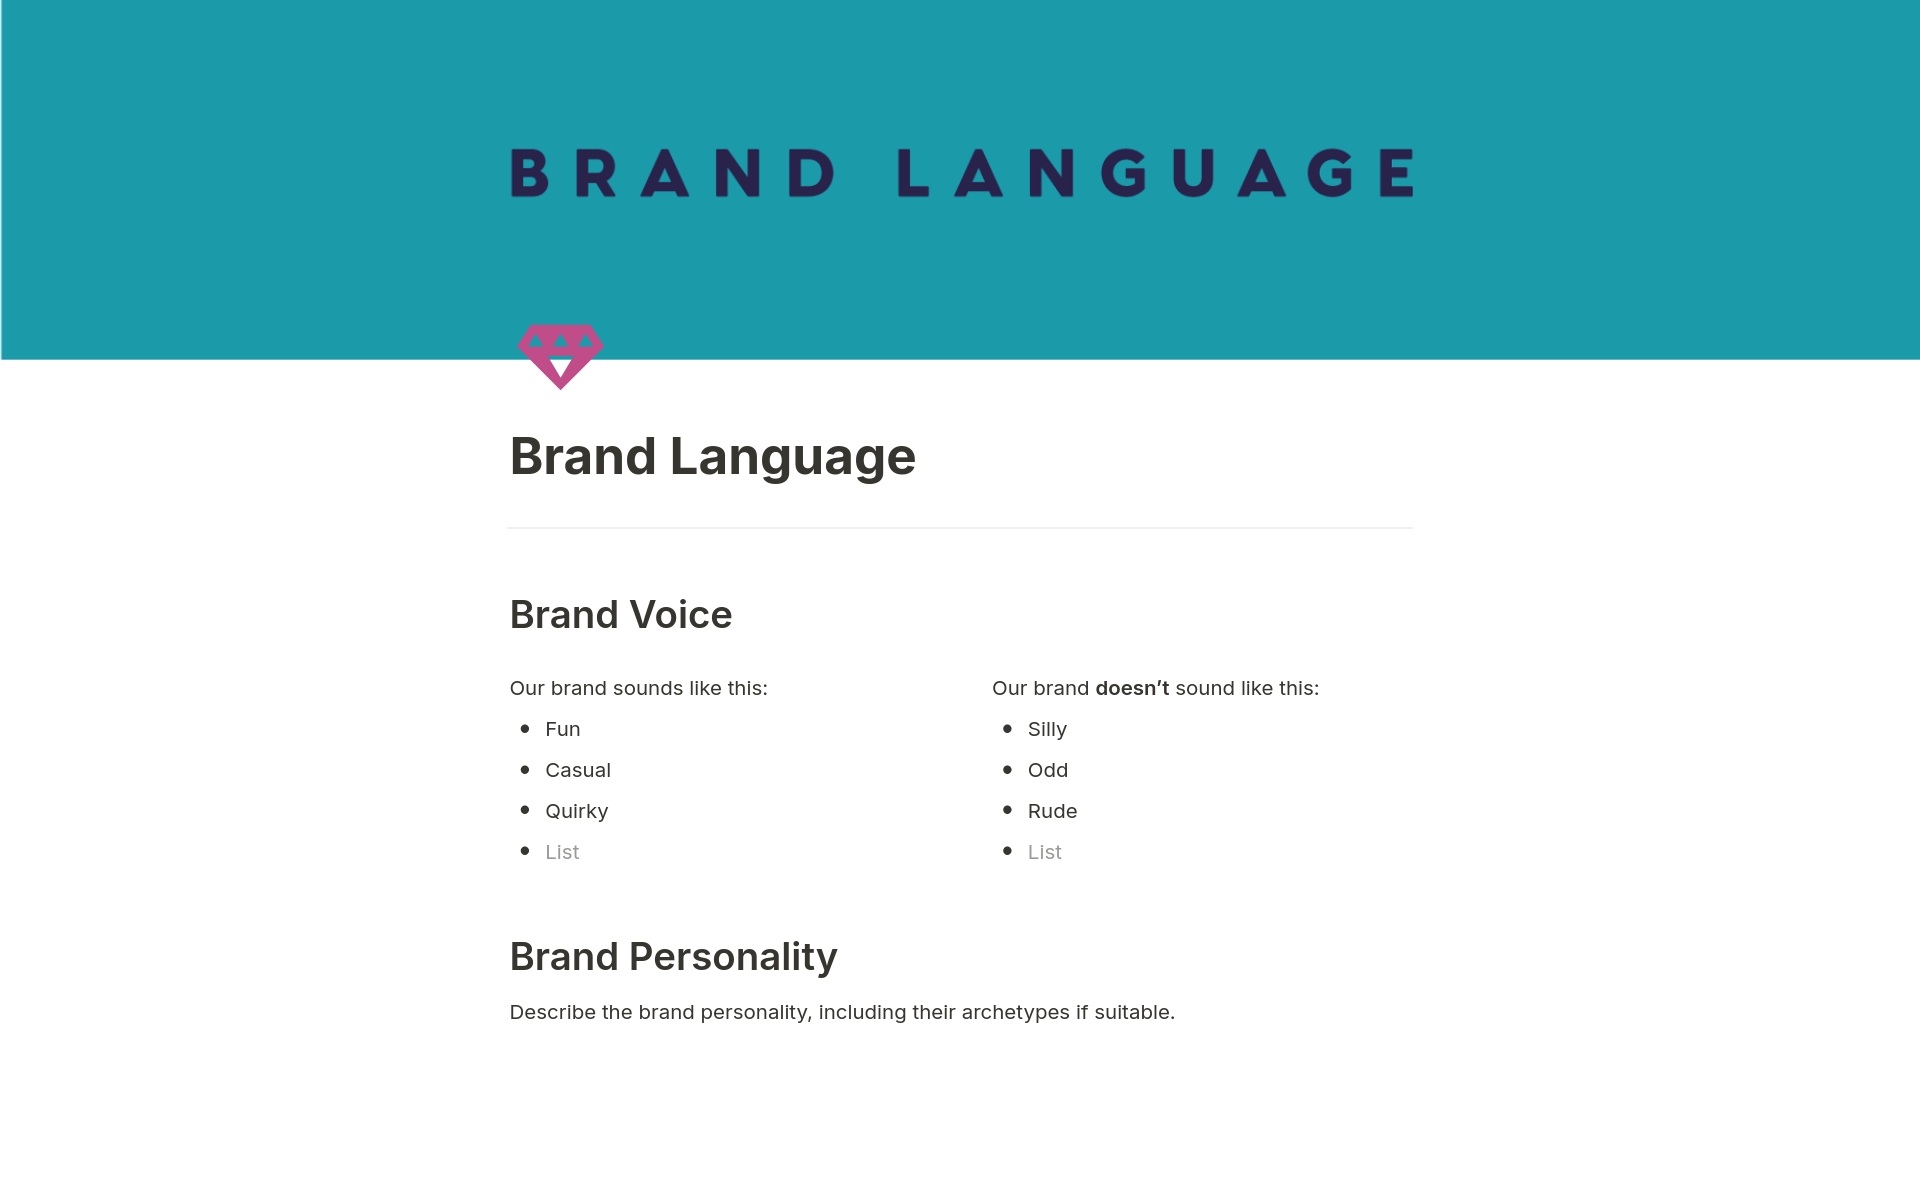 Streamline your client offboarding process and effortlessly inform your clients how to best use their new branding with this Brand Style Guide template.